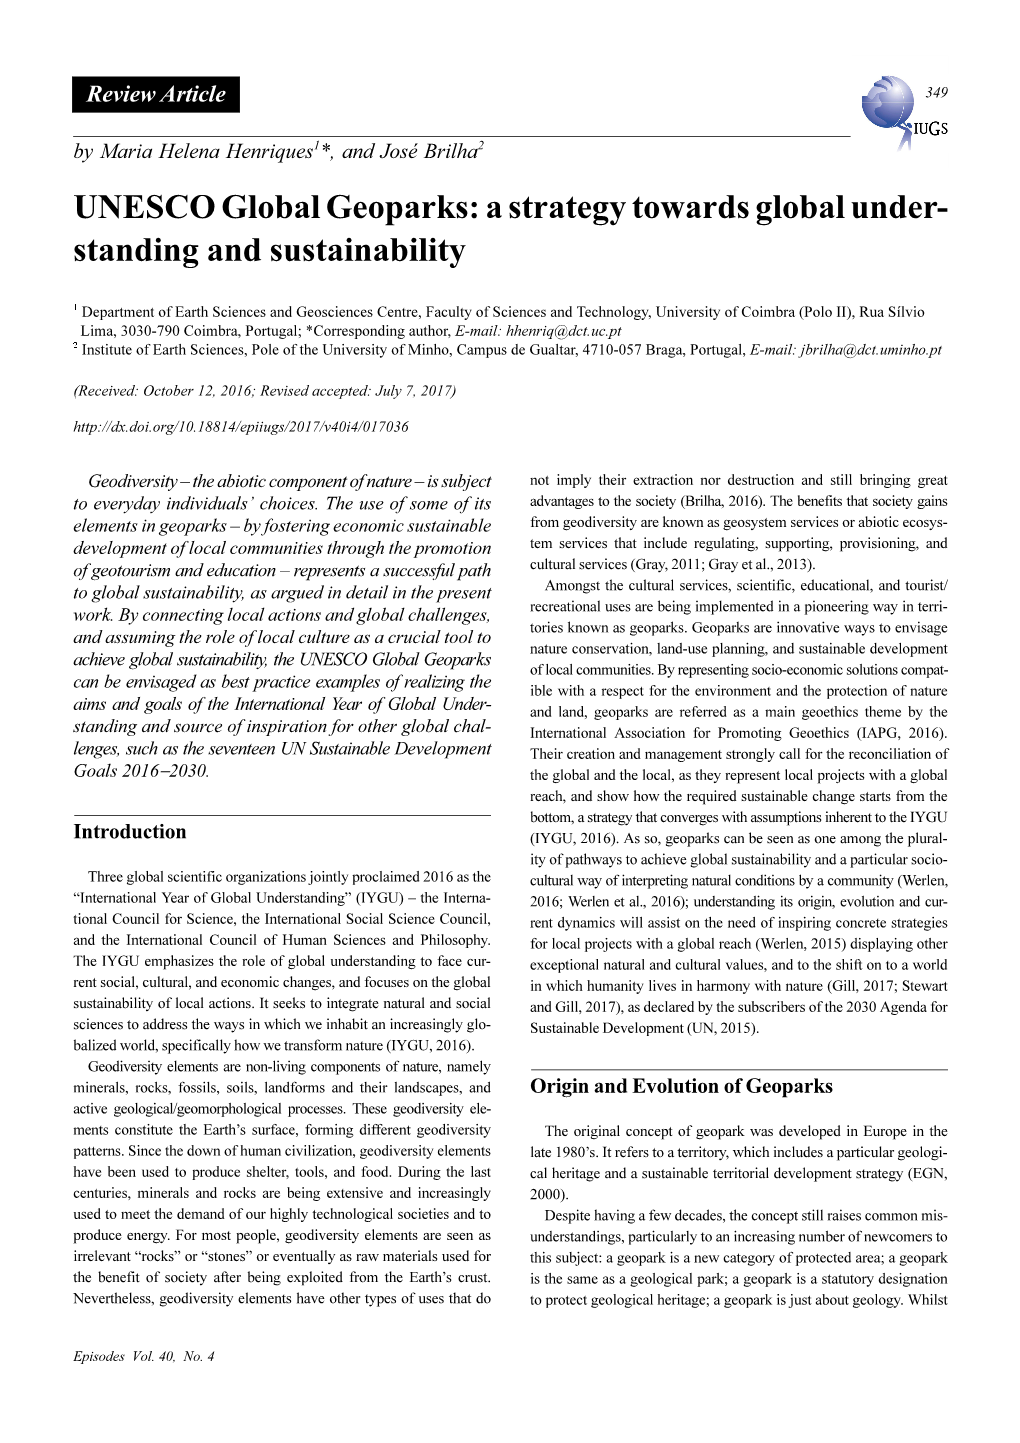 UNESCO Global Geoparks: a Strategy Towards Global Under- Standing and Sustainability